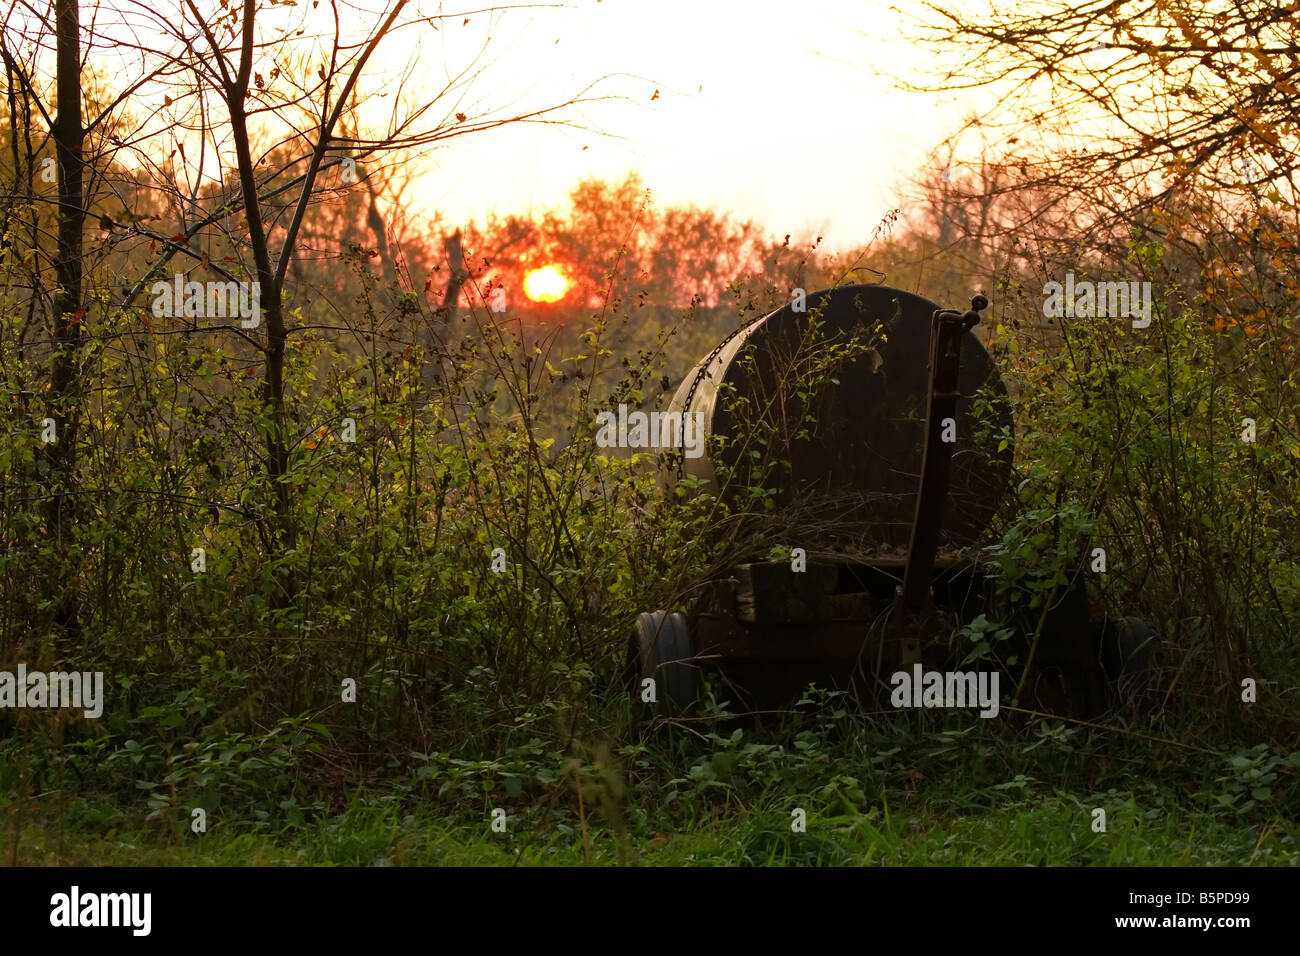 A farmers water cart sitting in the weeds. Stock Photo